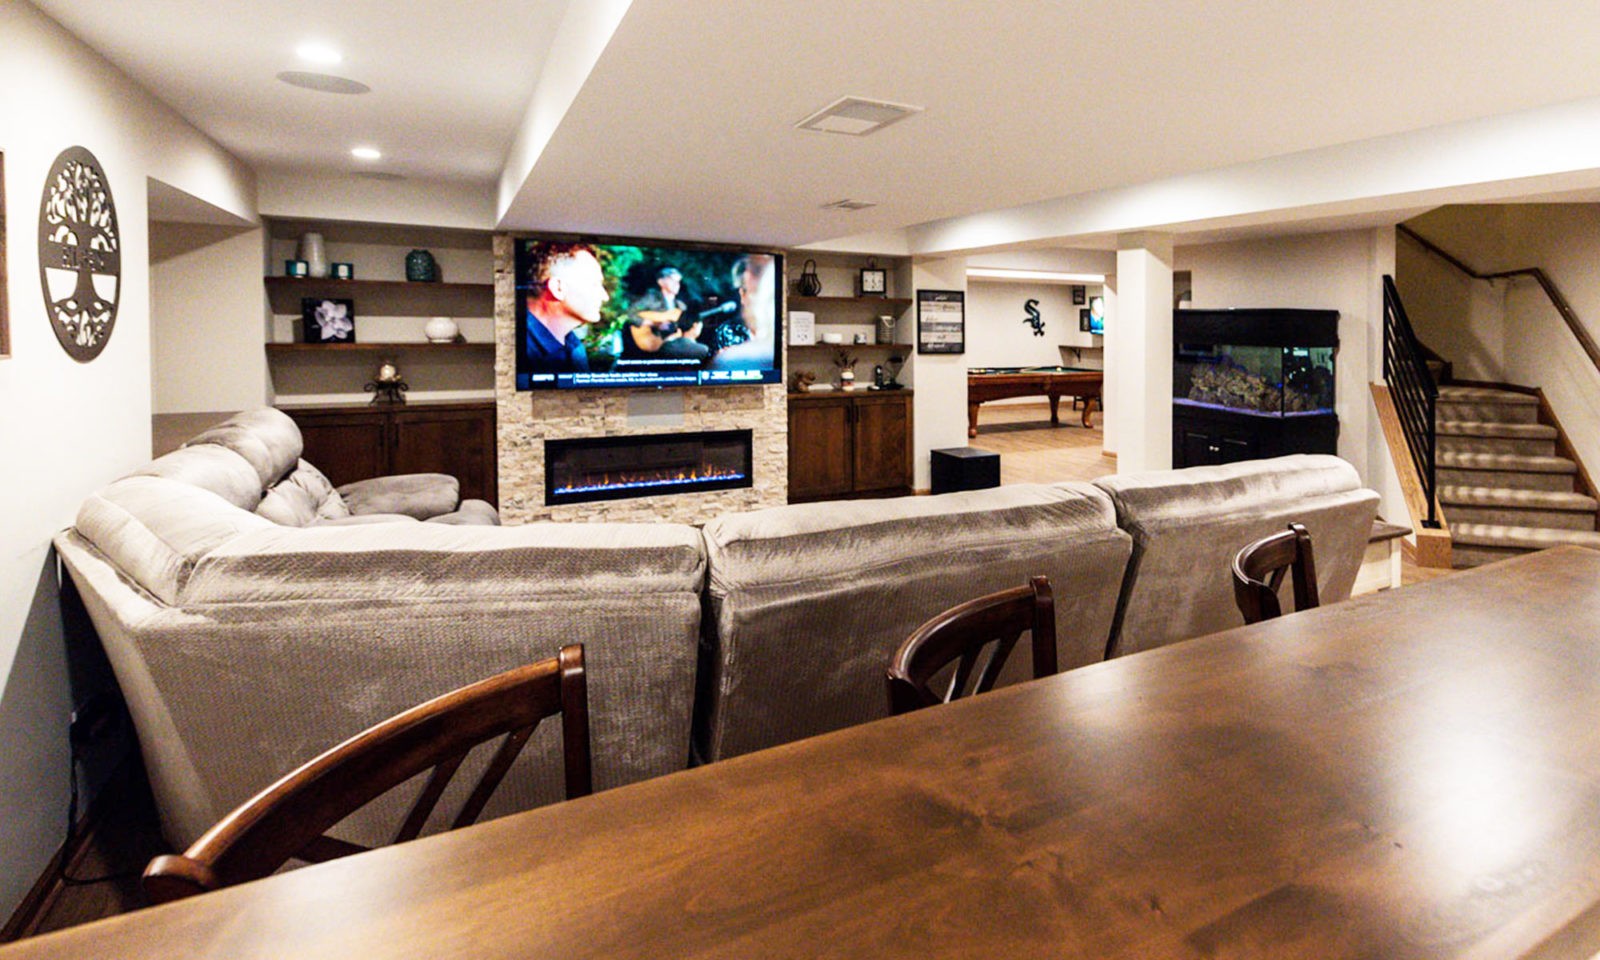 viw of basement home theatre area from bar